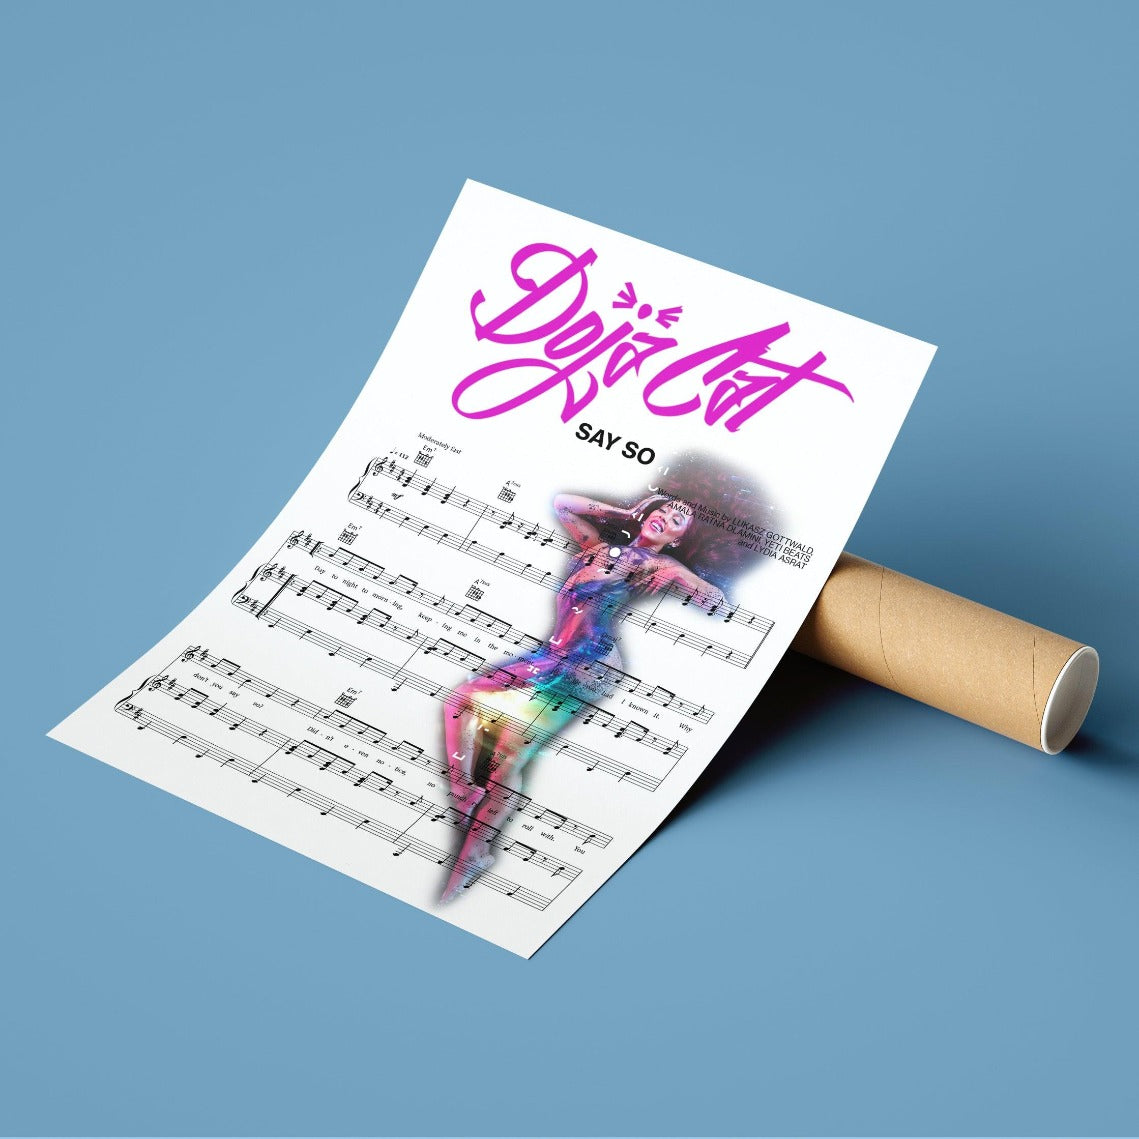 98Types Music is proud to release the song lyric art print poster of Doja Cat's hit song "Say So." This Collectible poster features the song lyrics from the song "Say So" by the artist Doja Cat beautifully designed and printed on high quality paper. Perfect for music lovers, this print is the perfect way to show your love for the song and the artist.